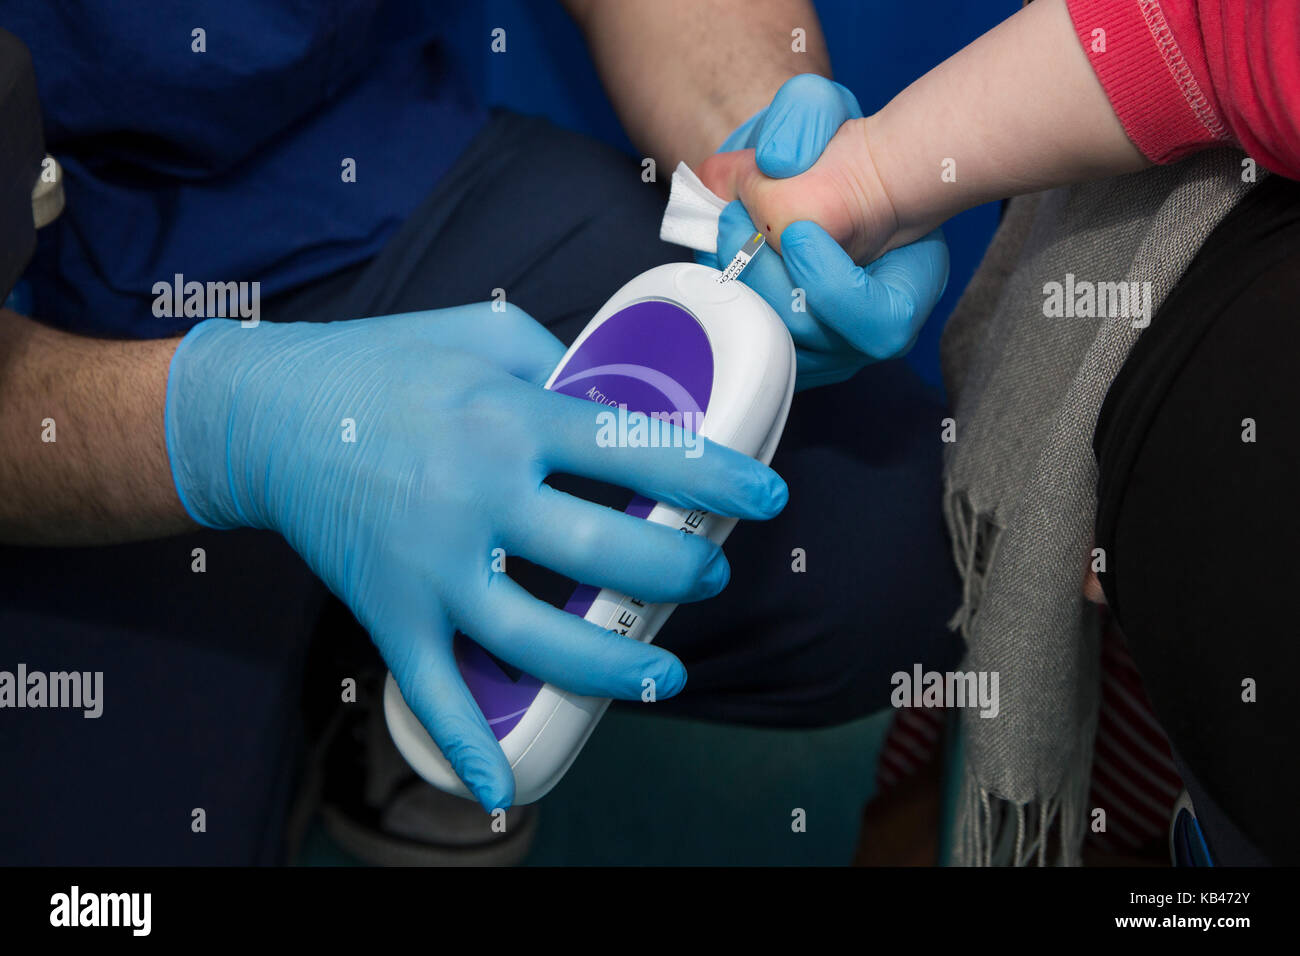 Accu-Check measuring a childs blood glucose levels Stock Photo